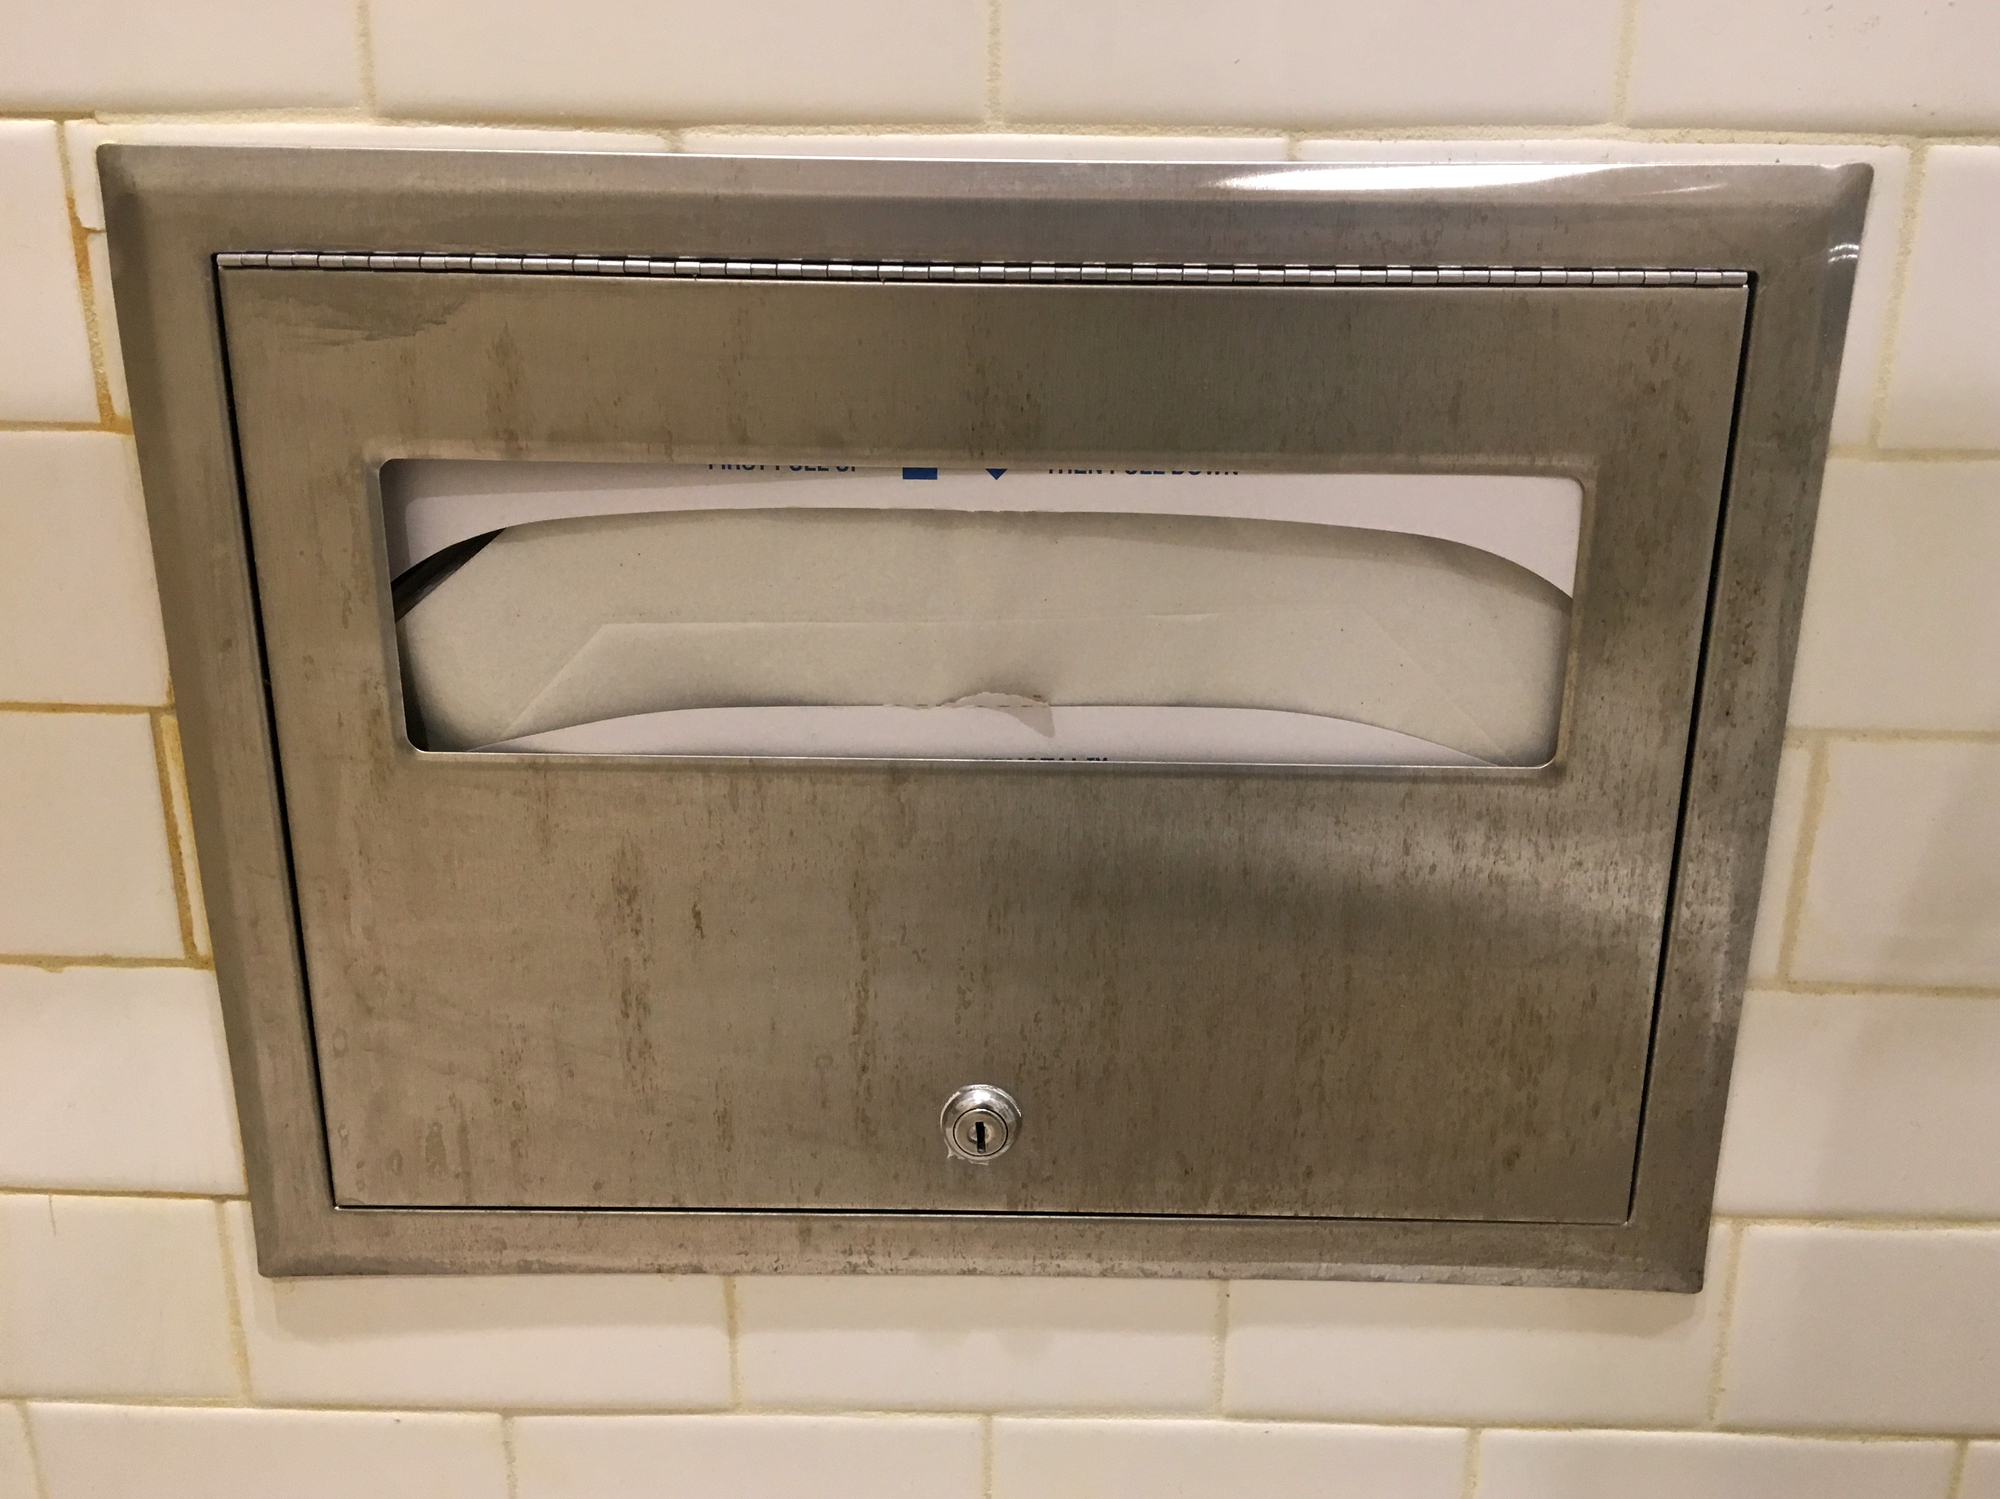 A metal paper towel dispenser embedded in a tiled wall, filled with paper towels, with a small viewing window